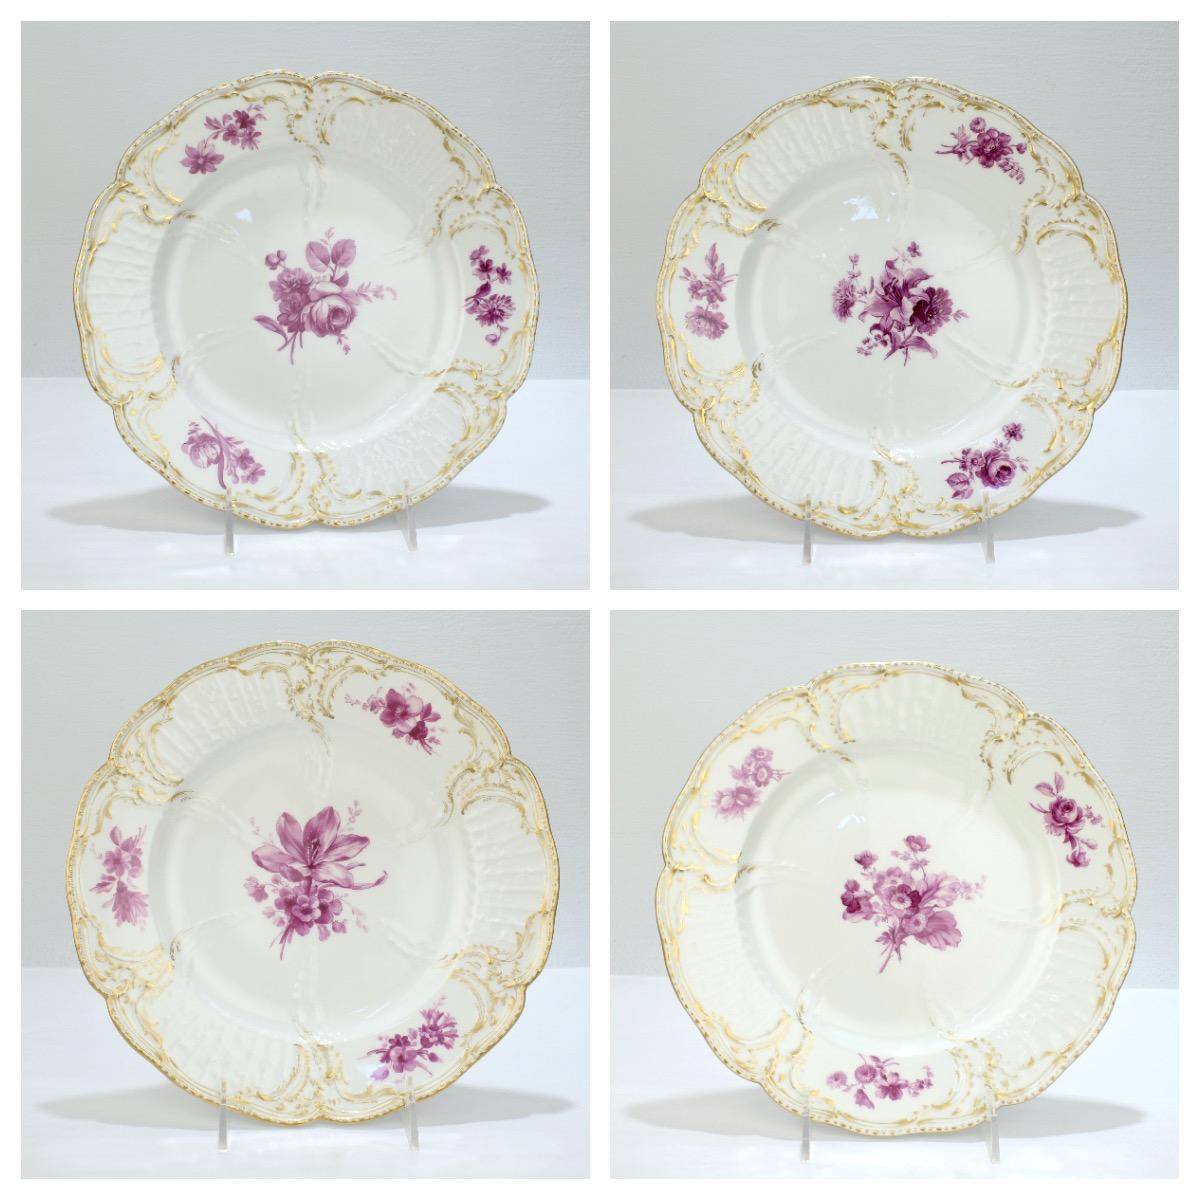 Hand-Painted Set of 12 Antique KPM Royal Berlin Porcelain Reliefzierat Dinner Plates in Puce